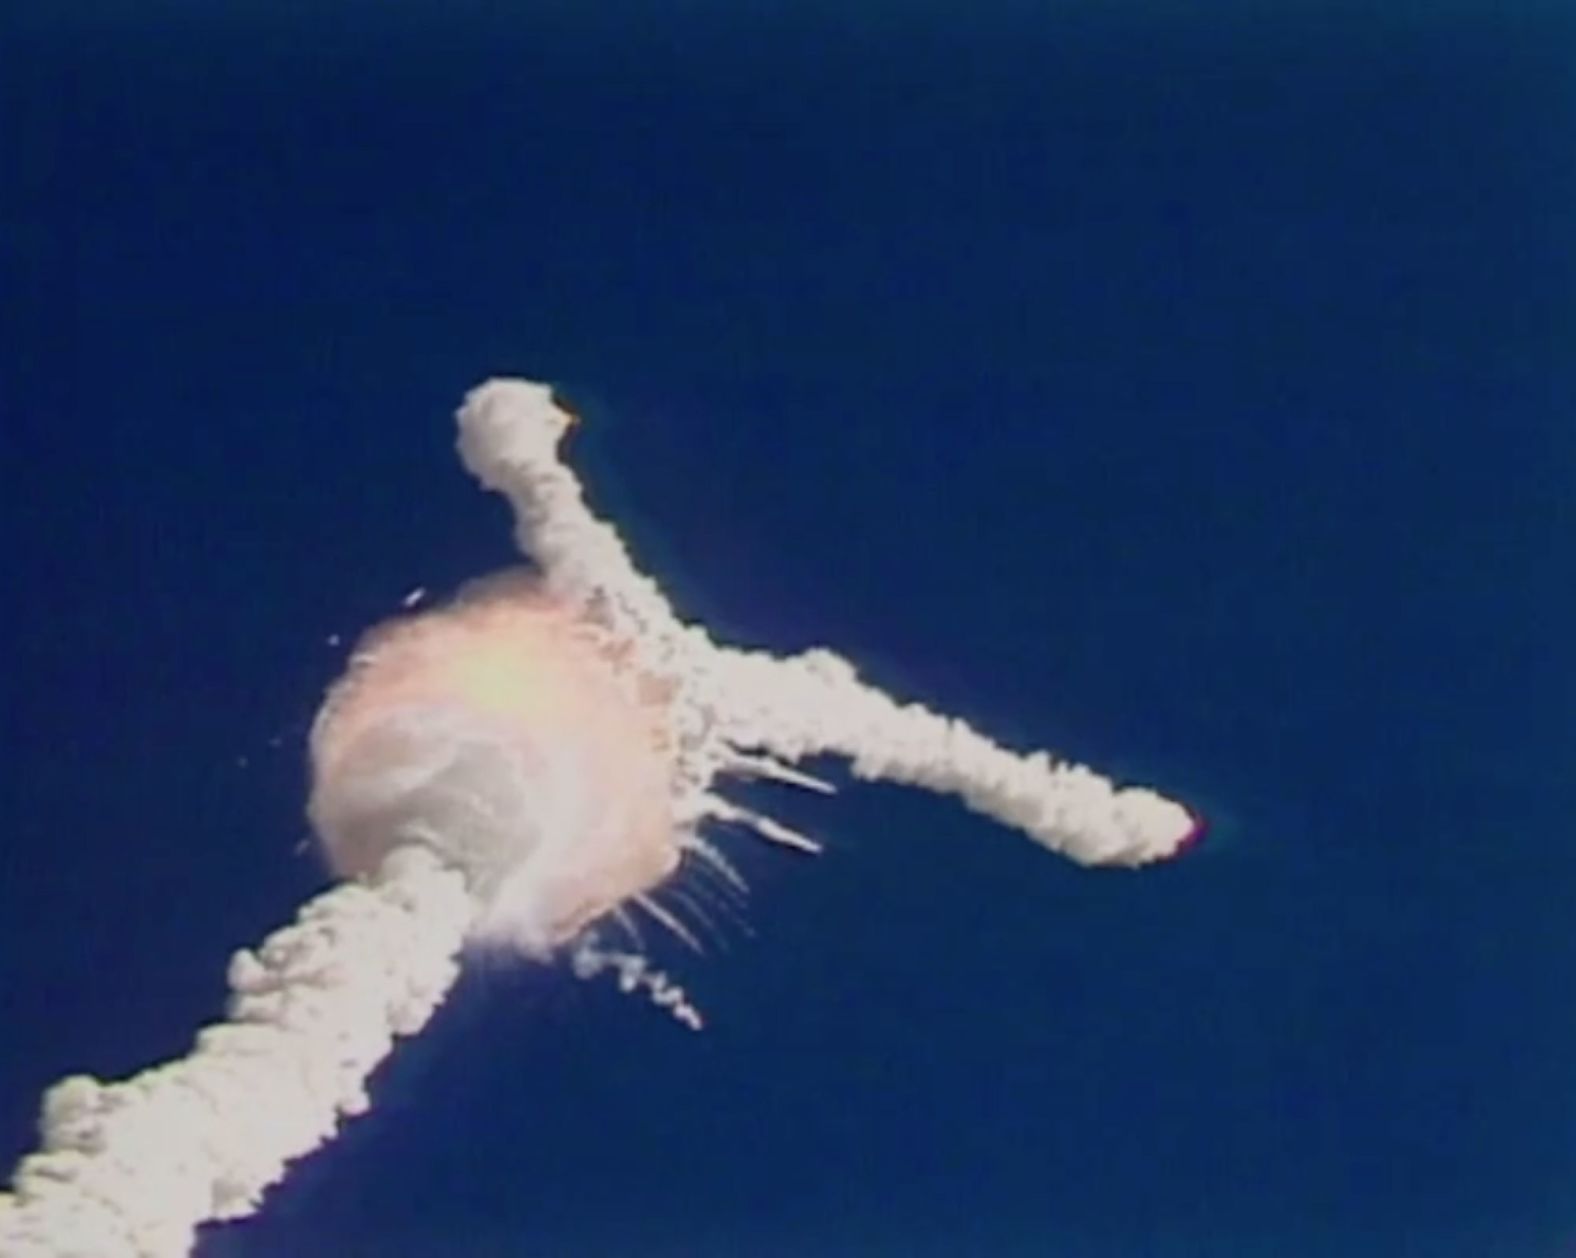 The Space Shuttle Challenger explodes just after takeoff from Kennedy Space Center in Cape Canaveral, Florida, on January 28, 1986. All seven crew members aboard were killed, including Christa McAuliffe, who would have been the first teacher in space. CNN was the only network to broadcast the disaster live.